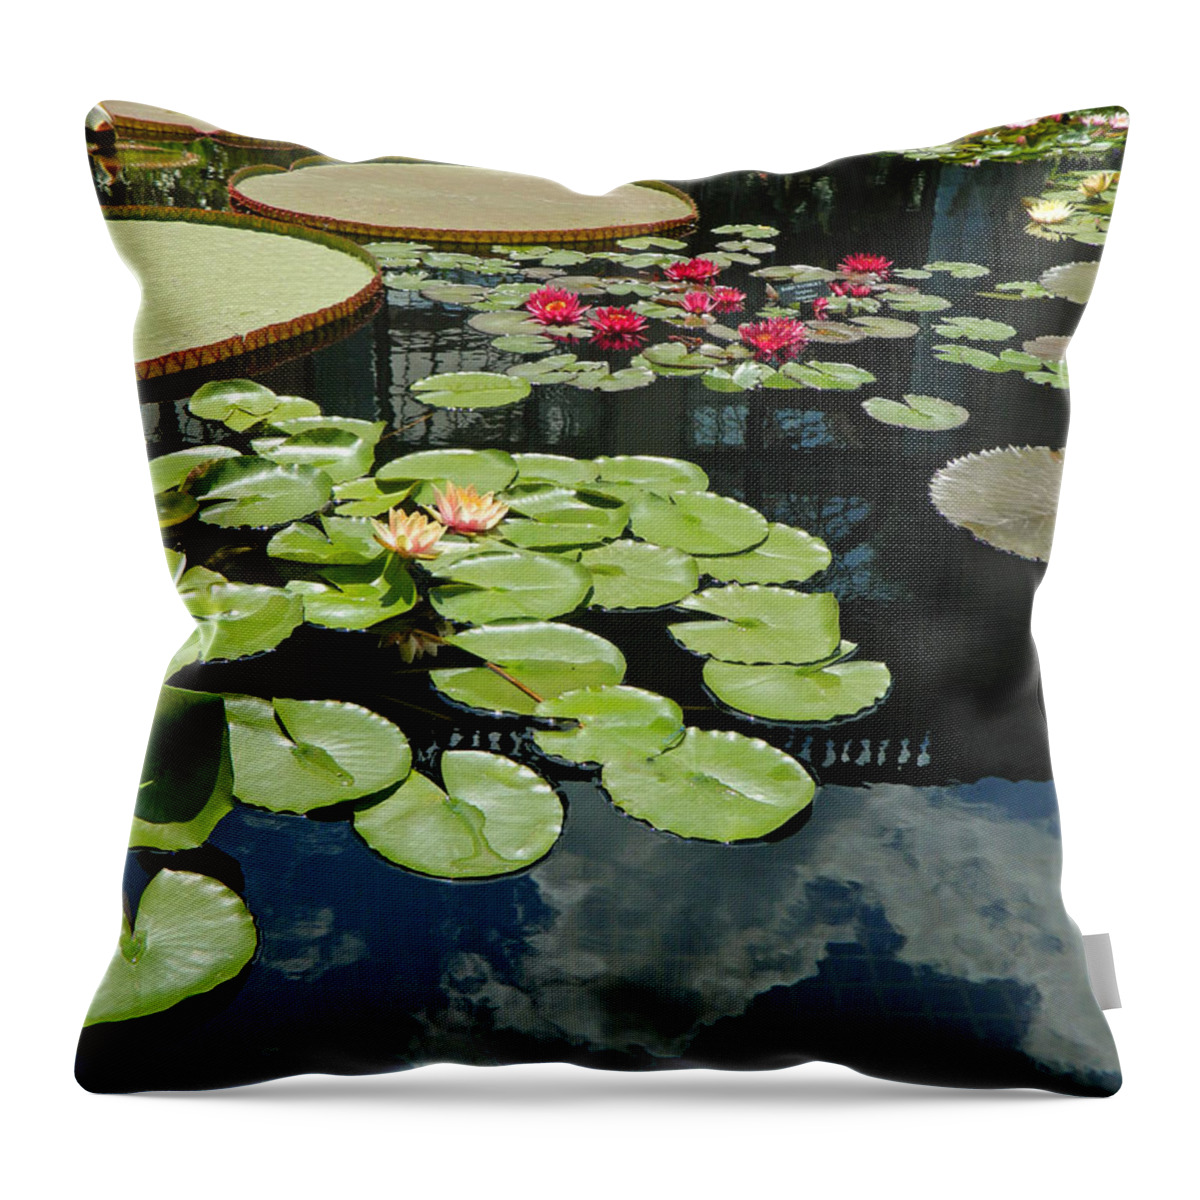 Pond Throw Pillow featuring the photograph A Pond Of Beauty by Emmy Marie Vickers